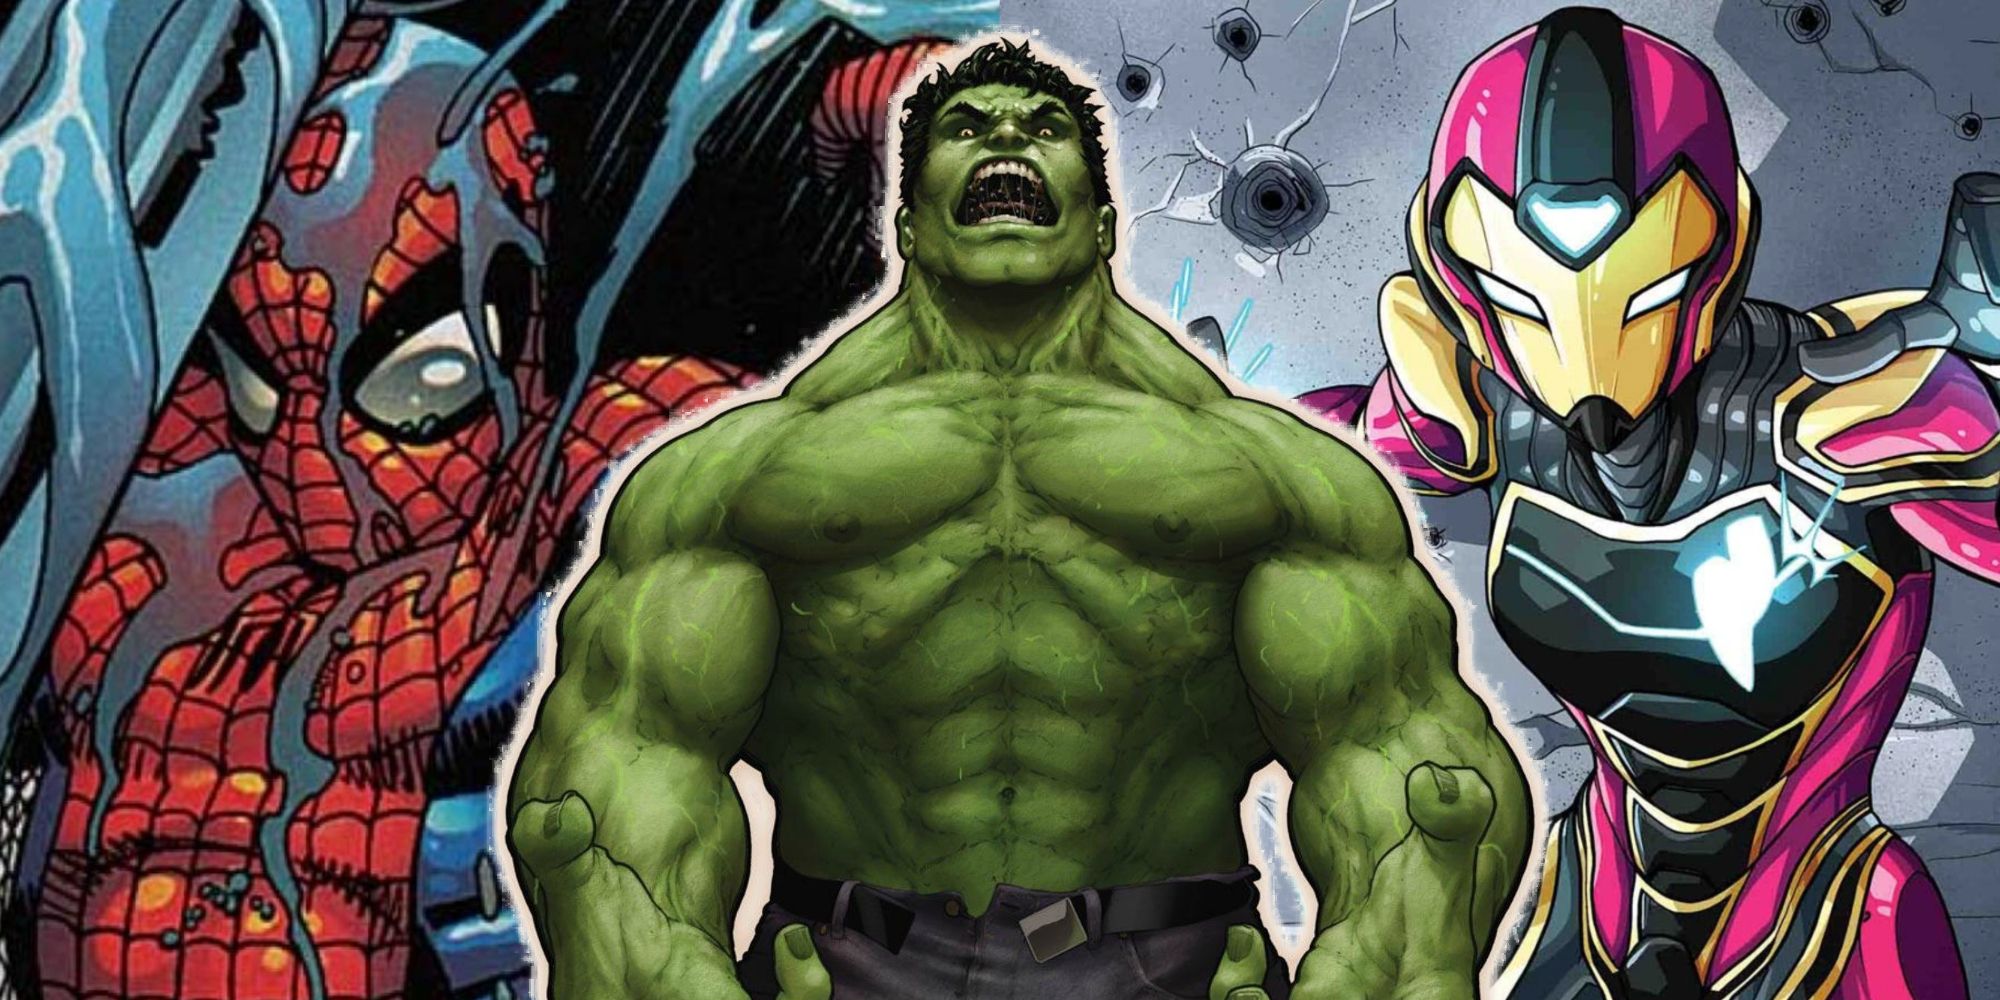 LIST: Most Popular Marvel Characters & Their Powers